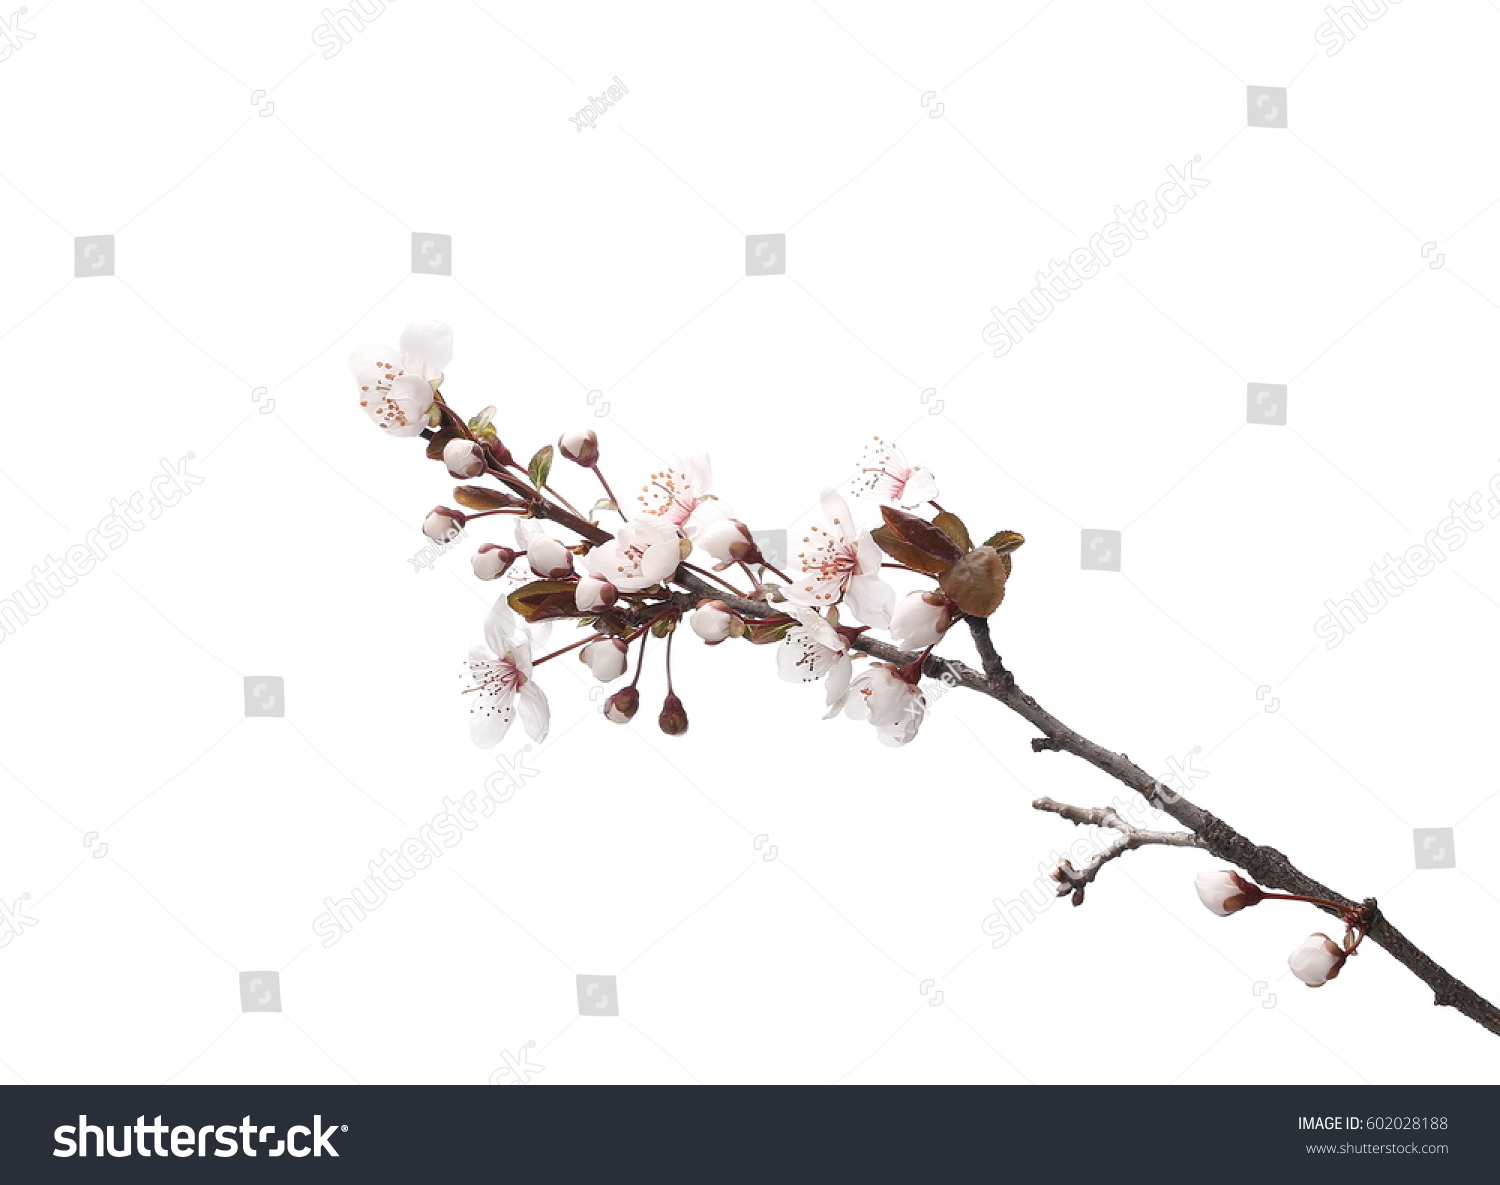 Cherry blossom branch, isolated on white background #602028188